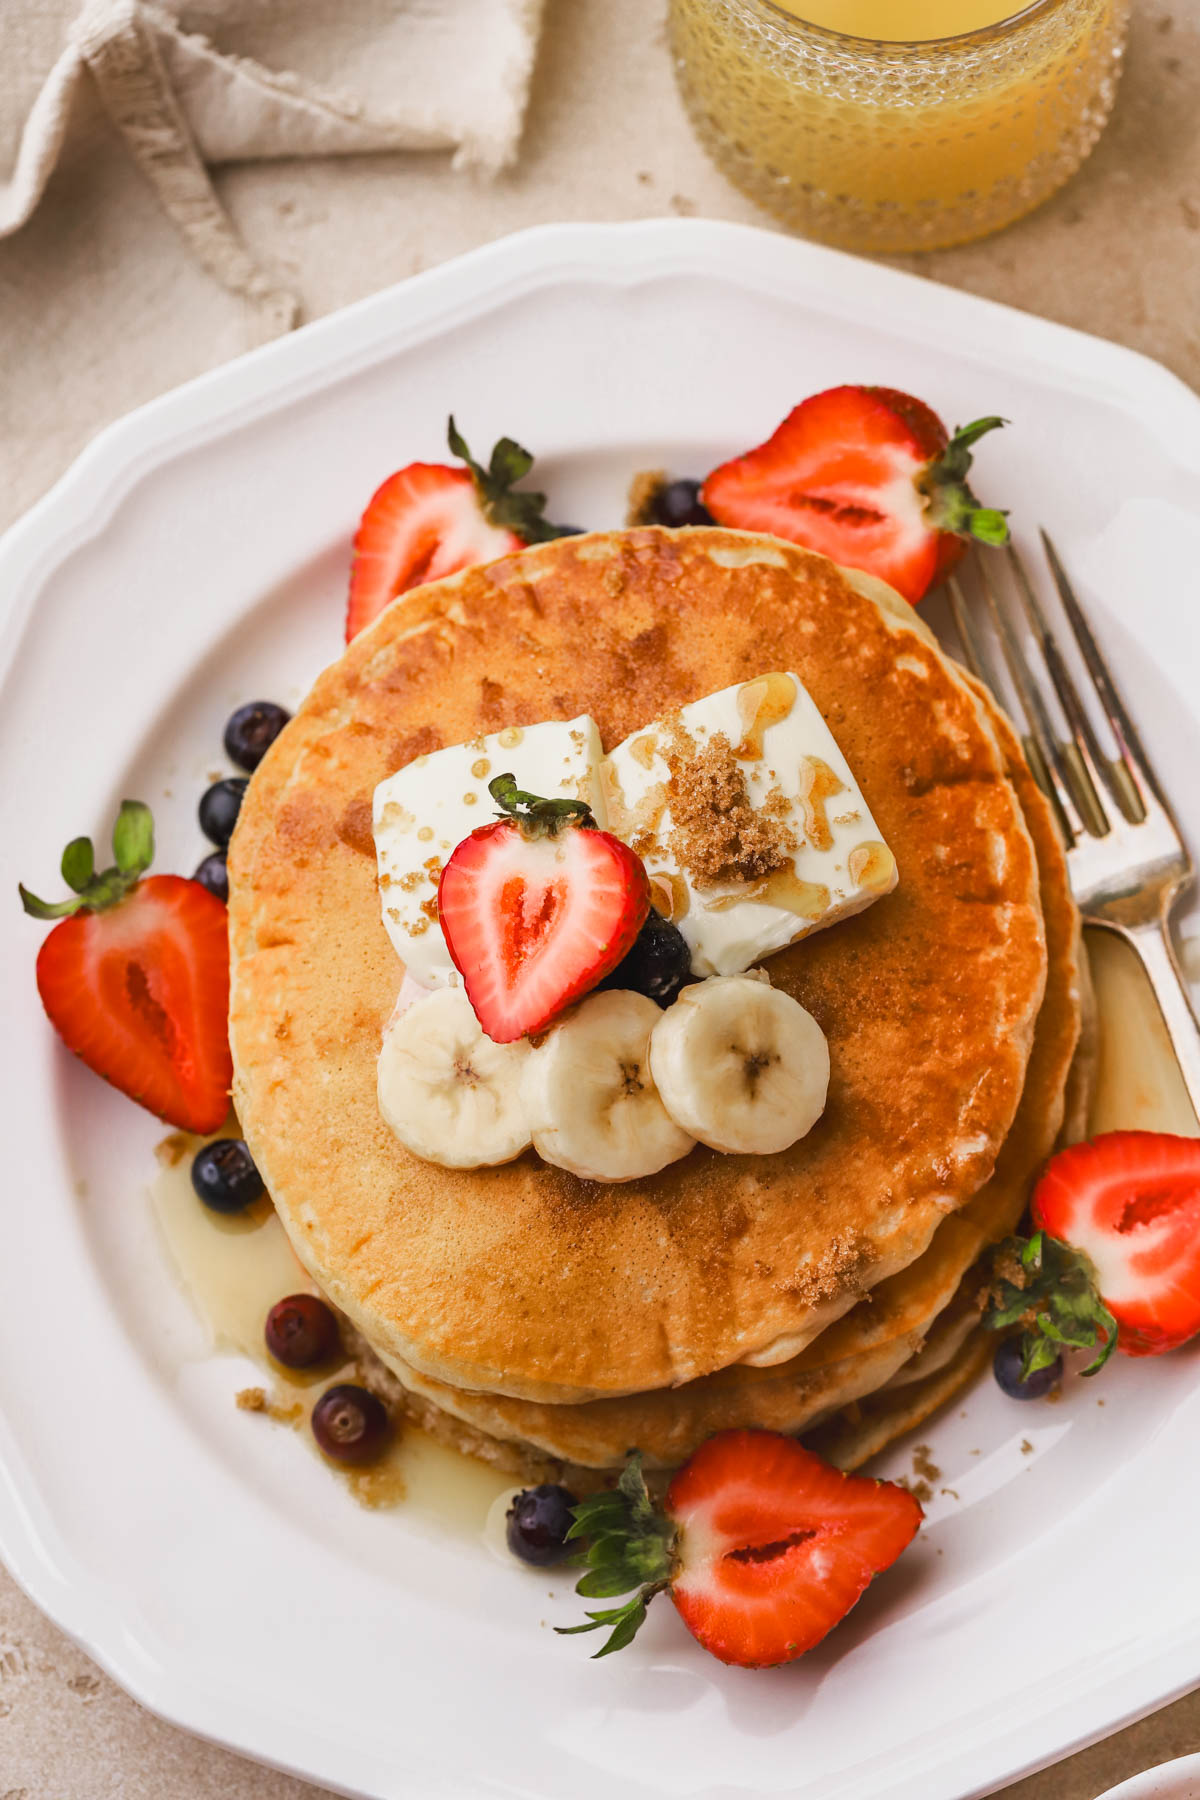 Pancakes with brown sugar, bananas, berries, butter and maple syrup. 